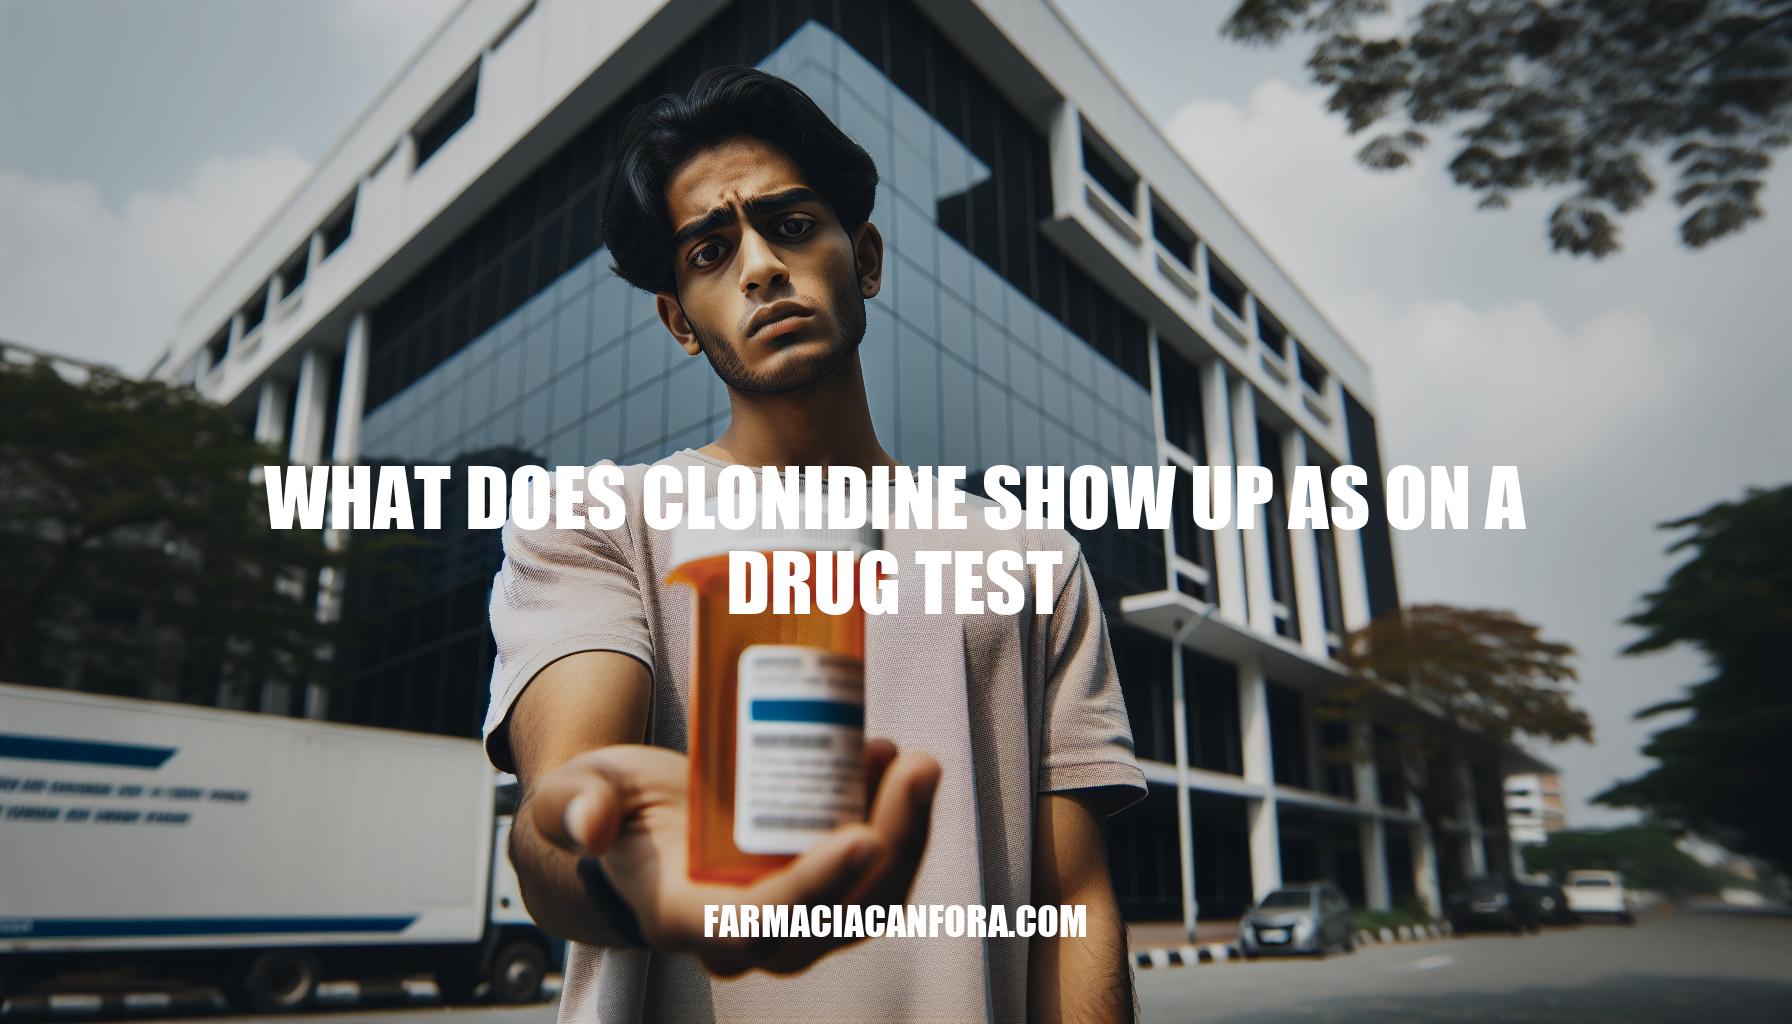 What Does Clonidine Show Up as on a Drug Test